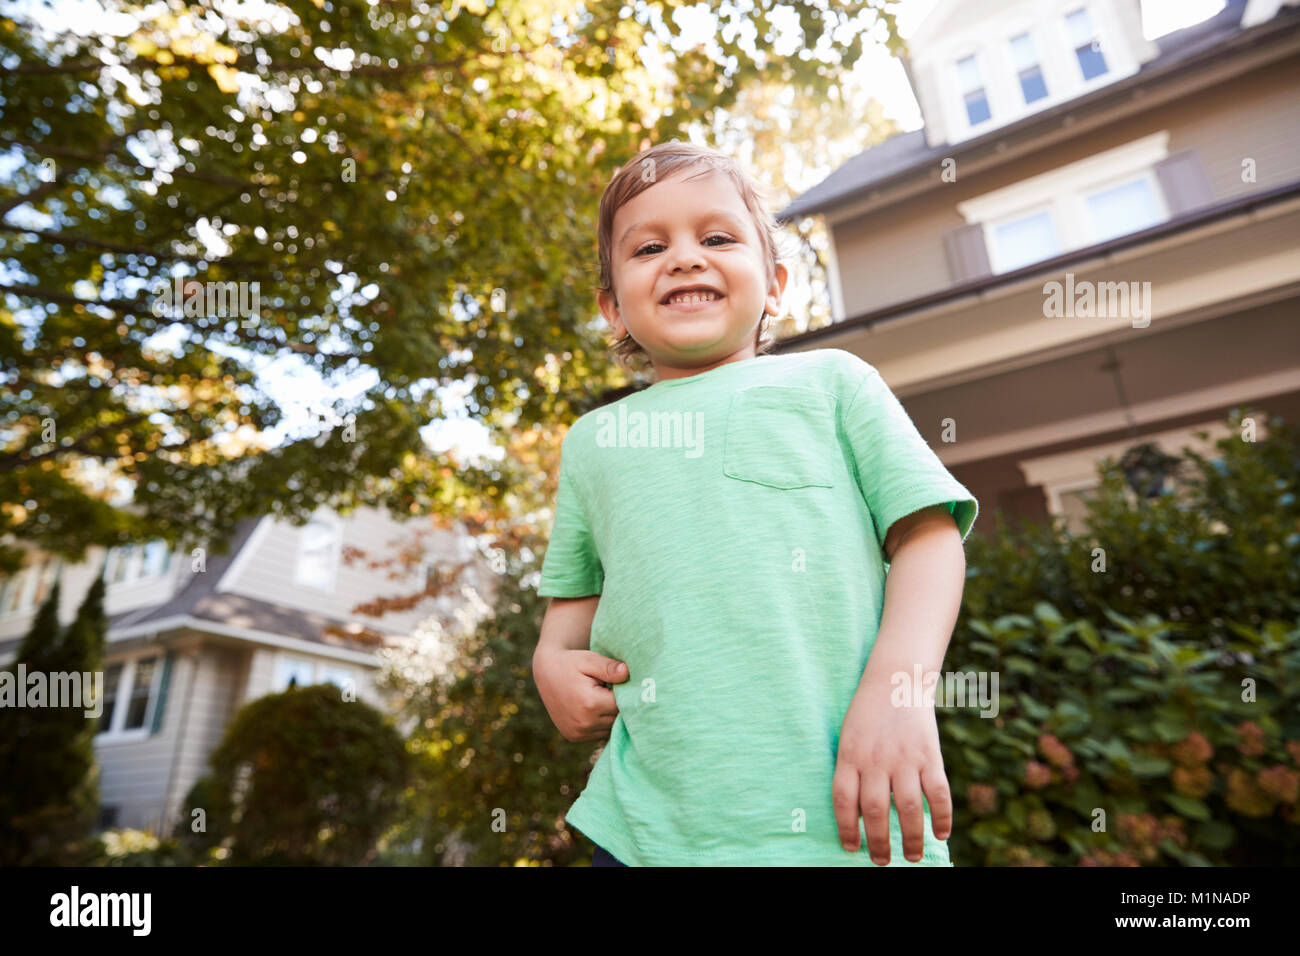 Portrait of Young boy playing in garden at home Banque D'Images